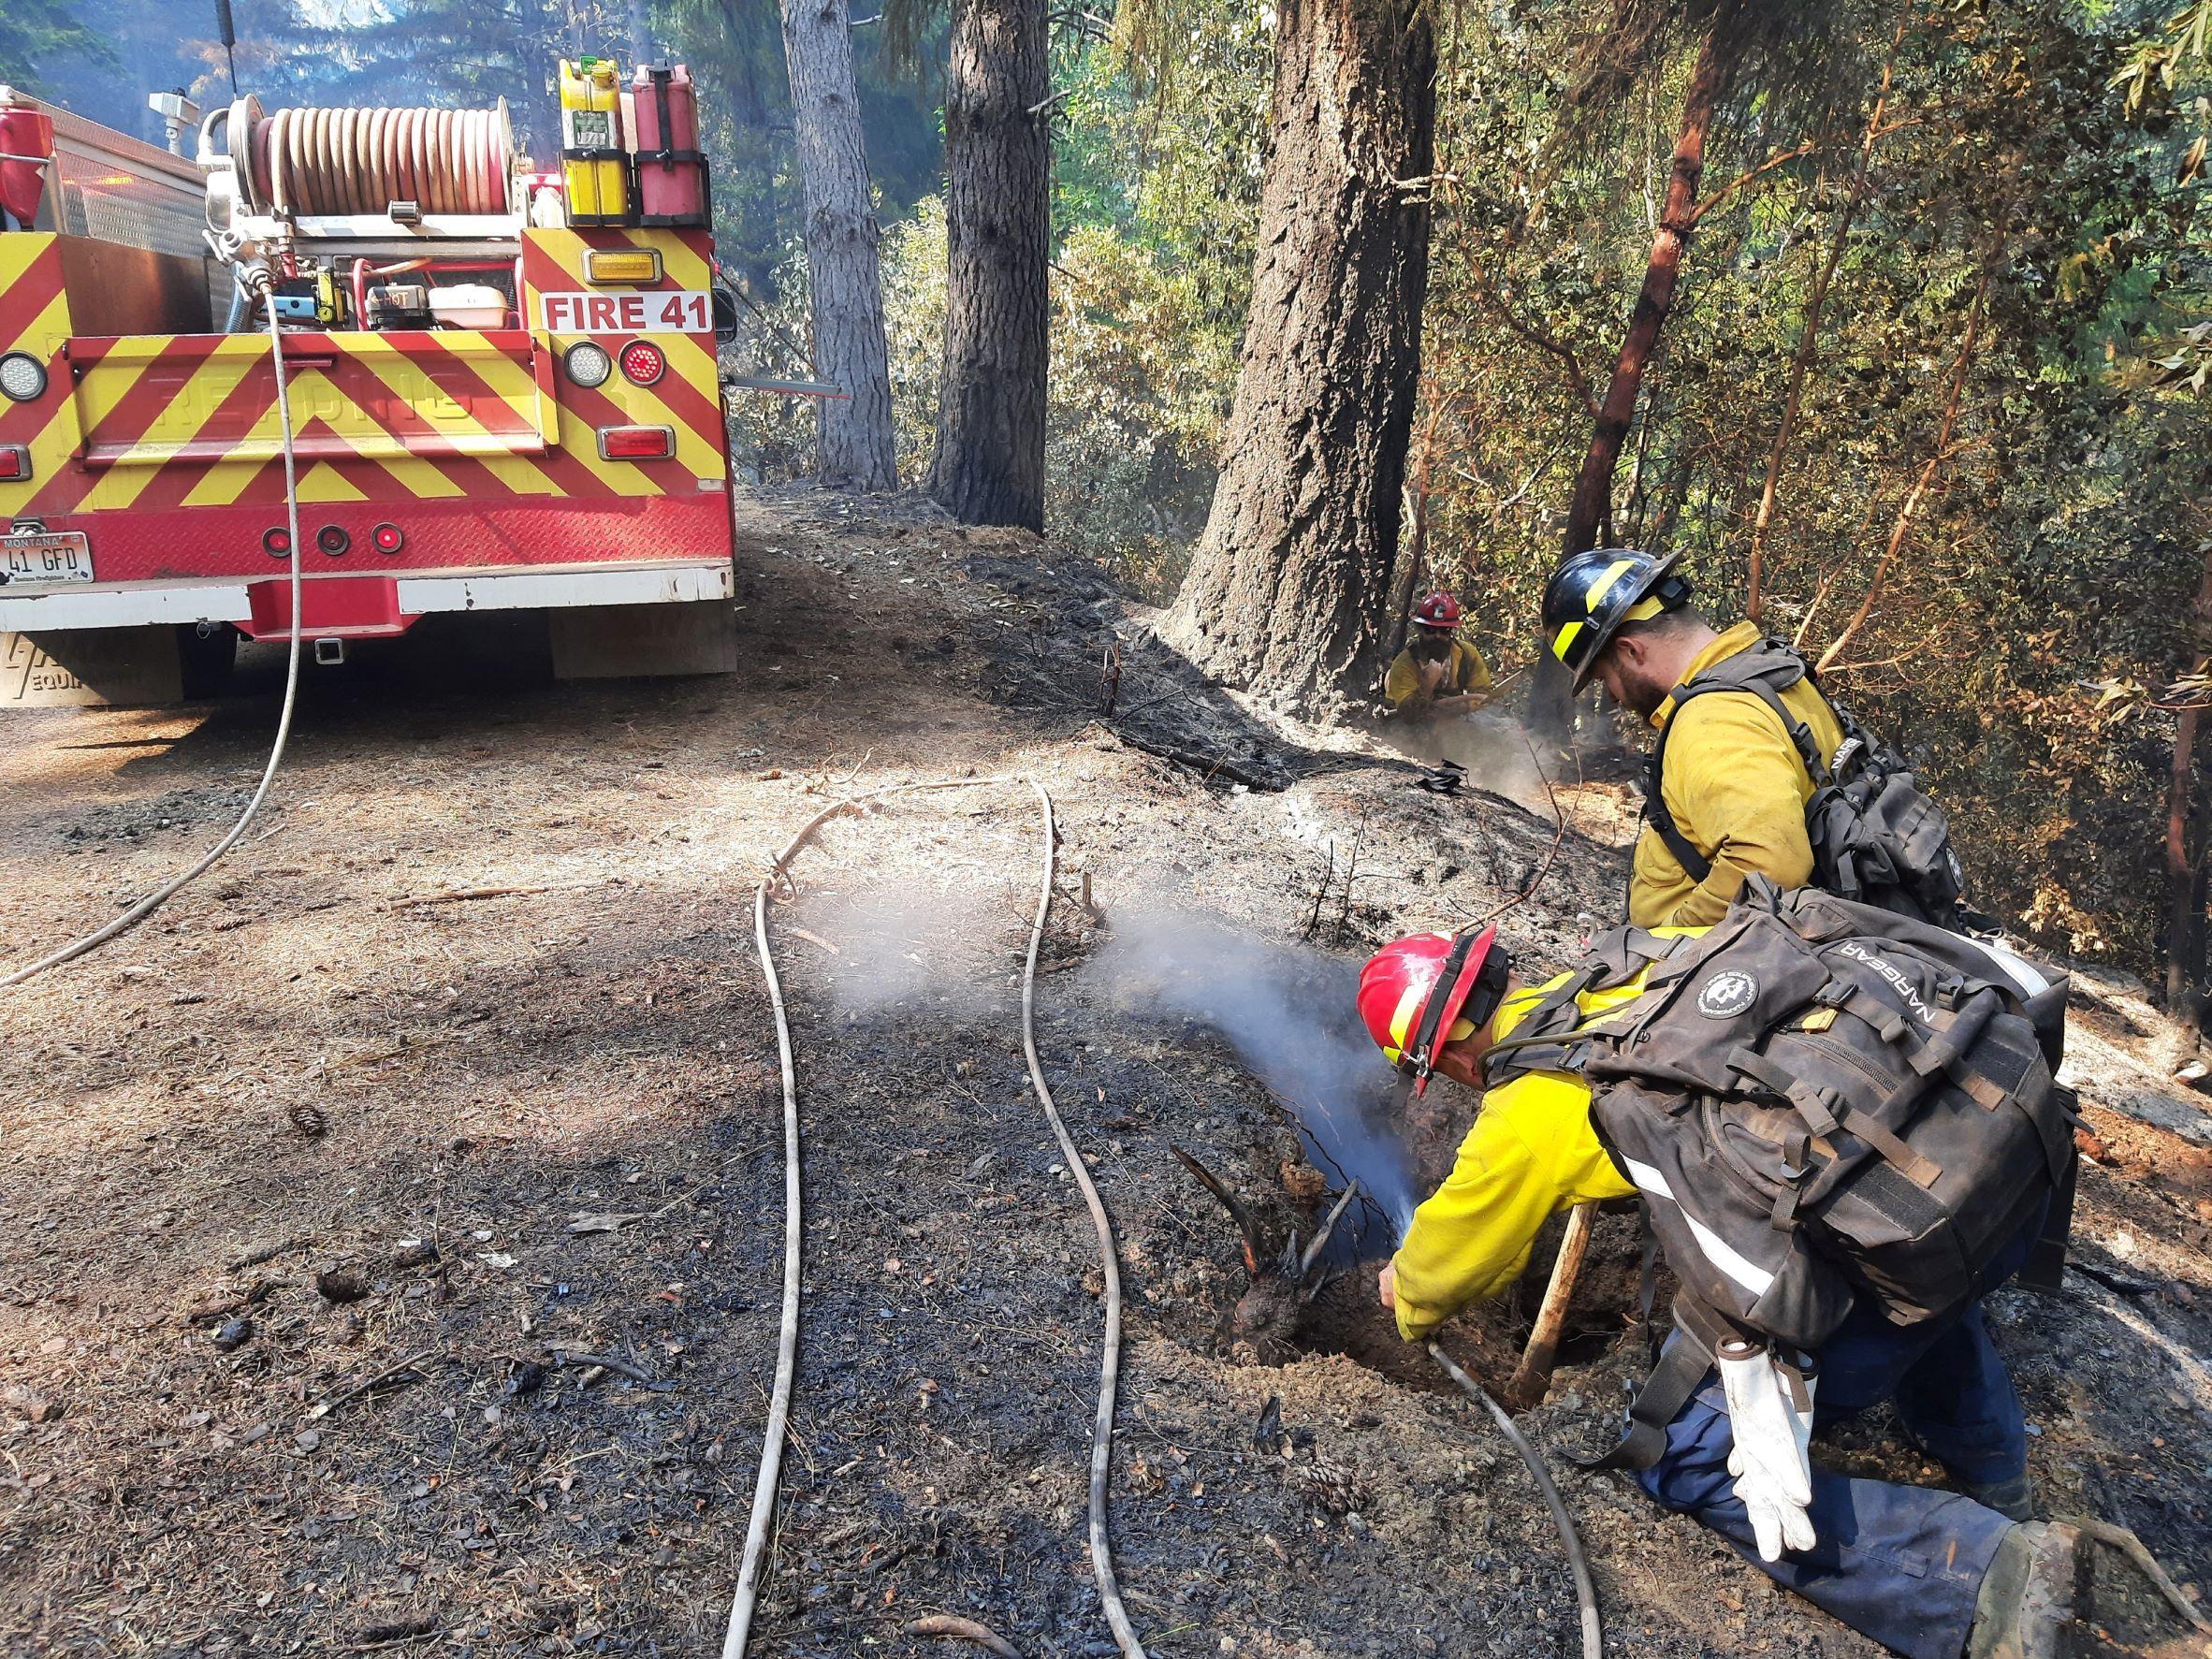 Two firefighters are working to extinguish heat in a stump hole. One is kneeling by the hole with a hose aimed into a hole from a side root, creating a cloud of smoke and steam. The other has a tool, waiting to dig. An engine sits in the background.